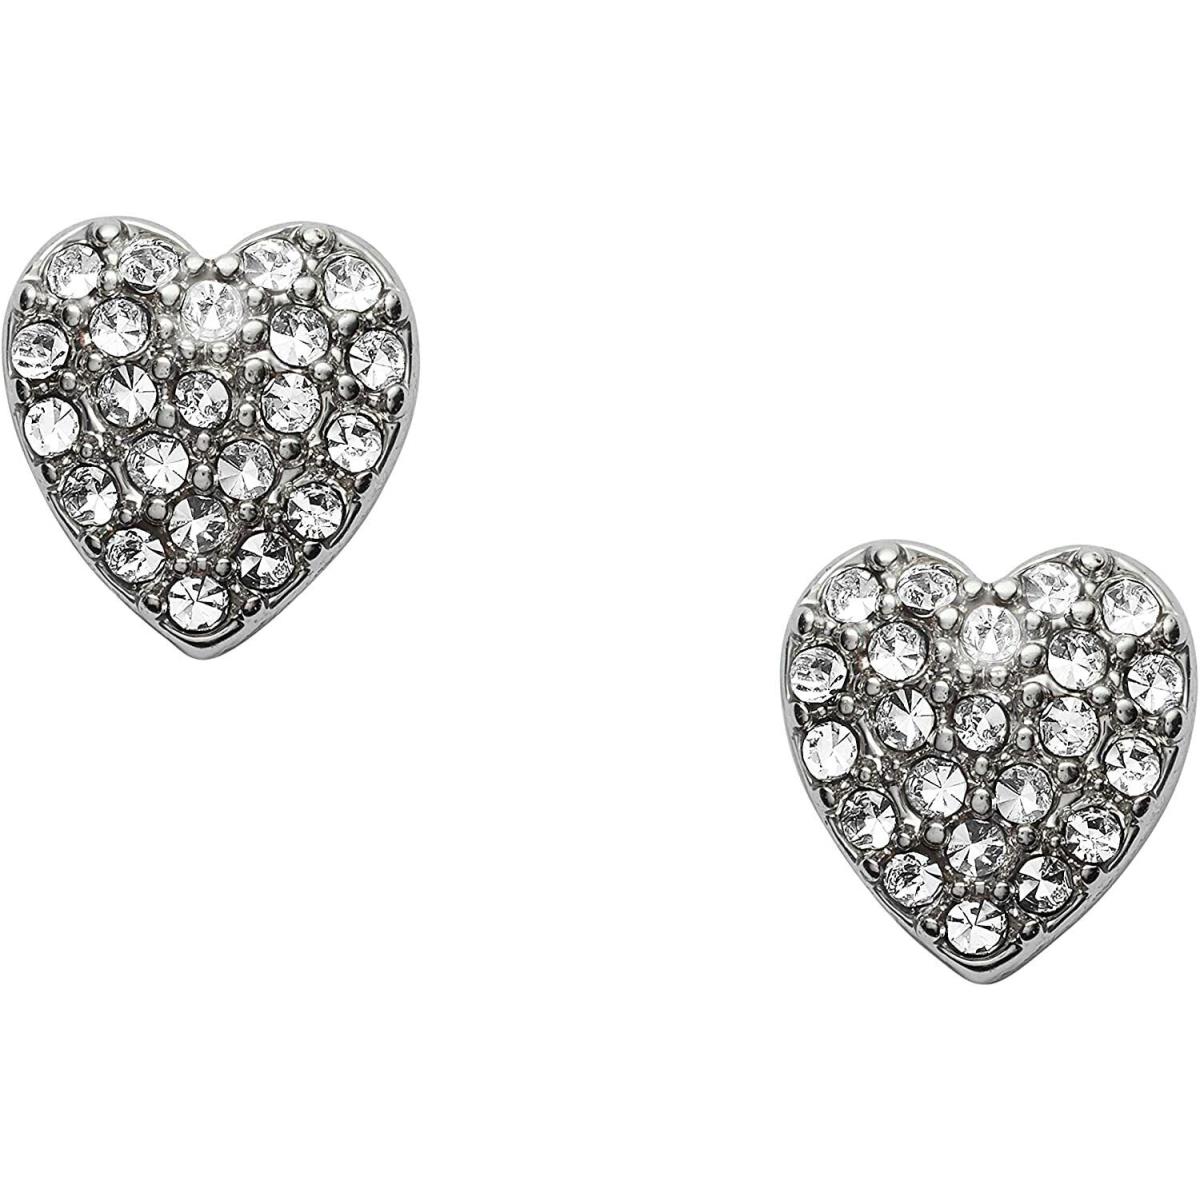 Fossil Silver Tone Crystals Pave Heart Stud EARRINGS-JOA00041040